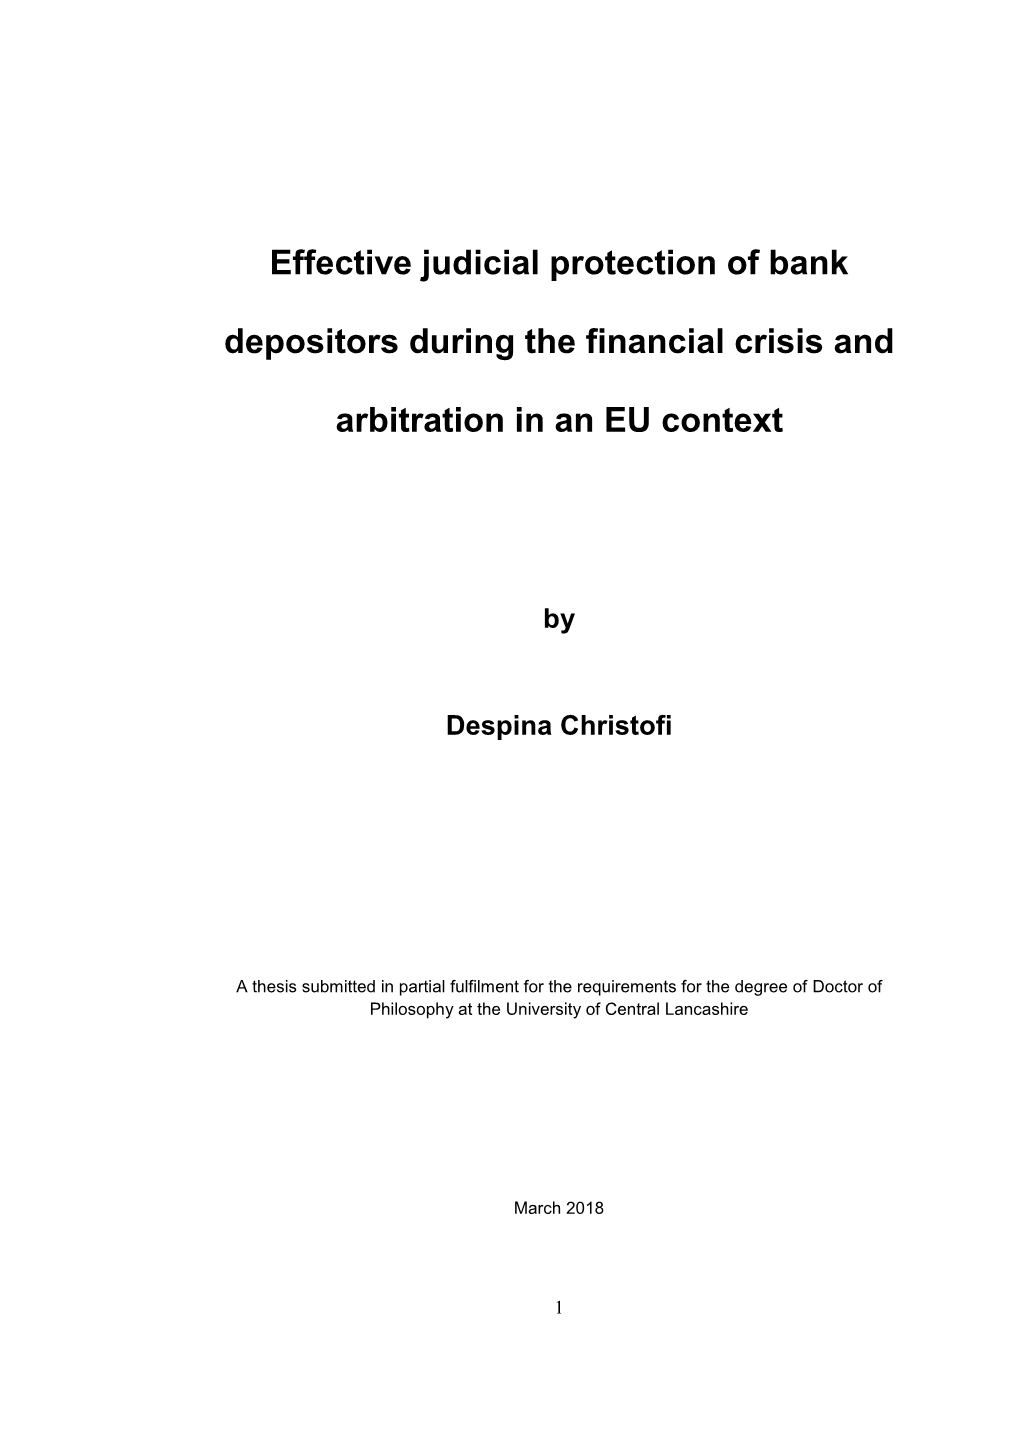 Effective Judicial Protection of Bank Depositors During the Financial Crisis And